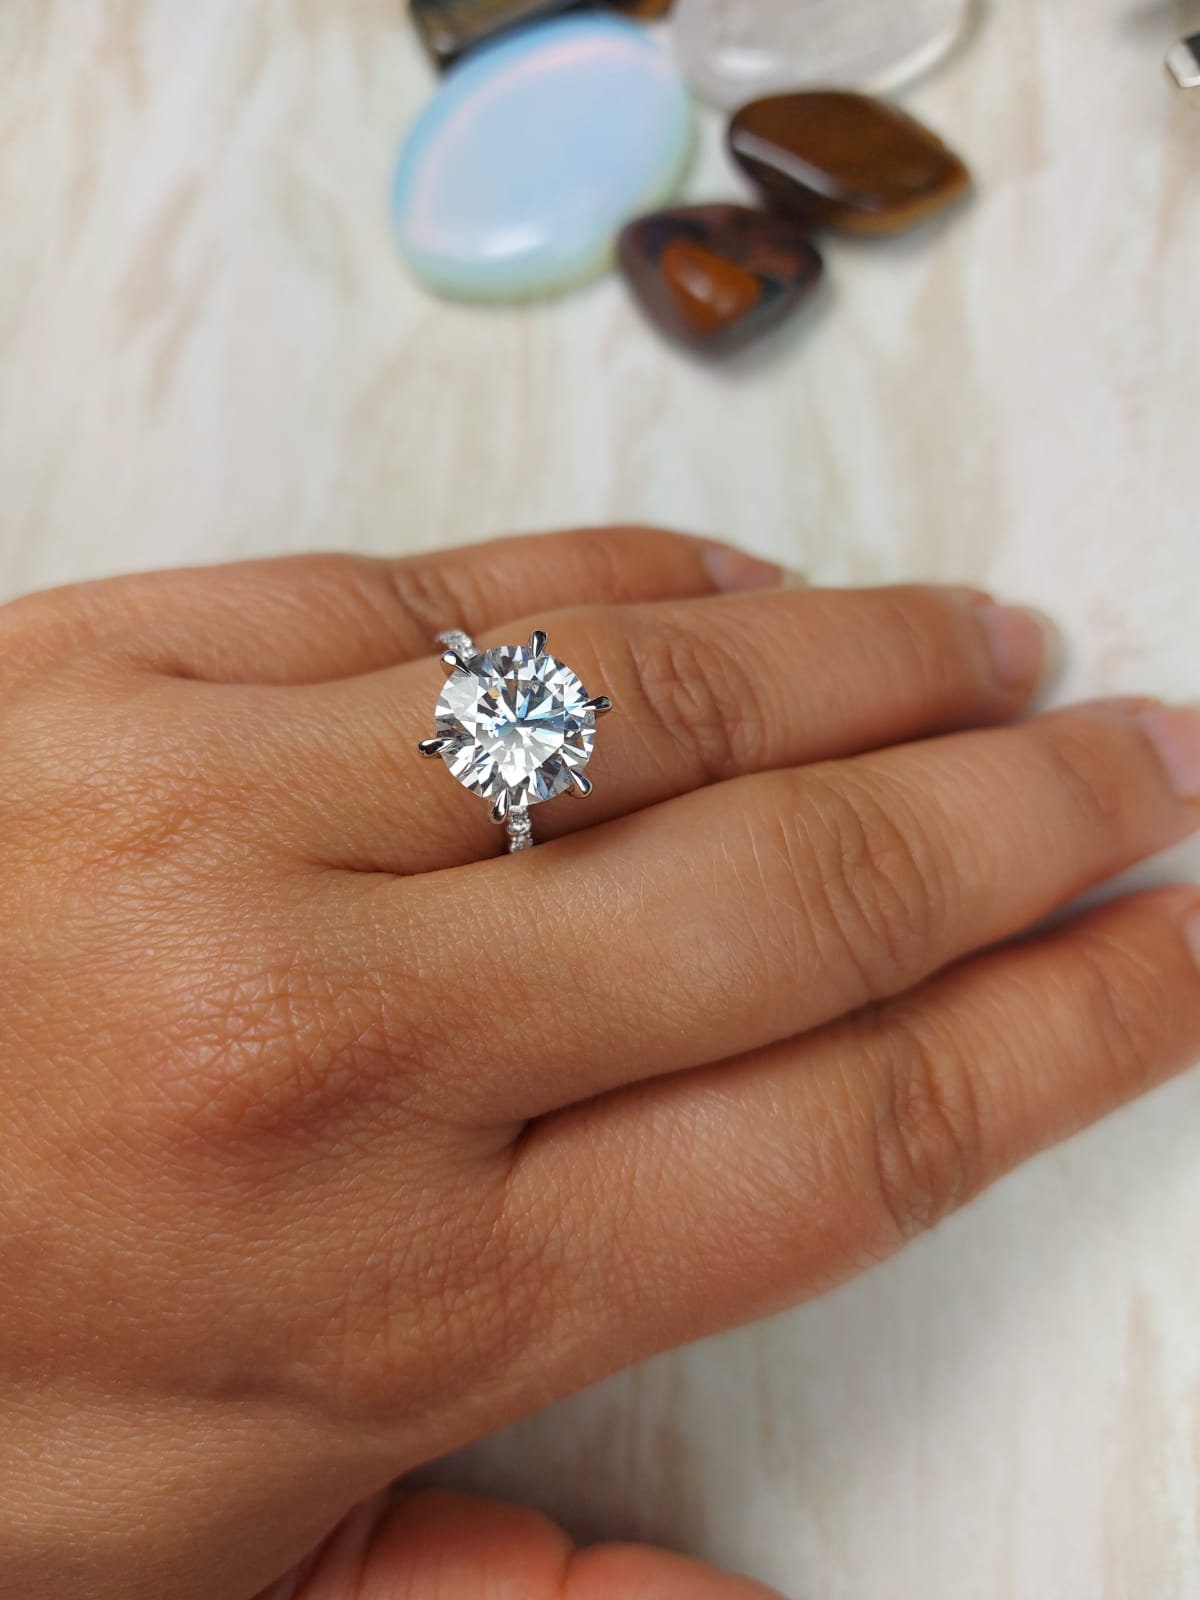 Details about   3 ct Extra Brilliant Heirloom Ring Top CZ Imitation Moissanite Simulant Size 8.5 